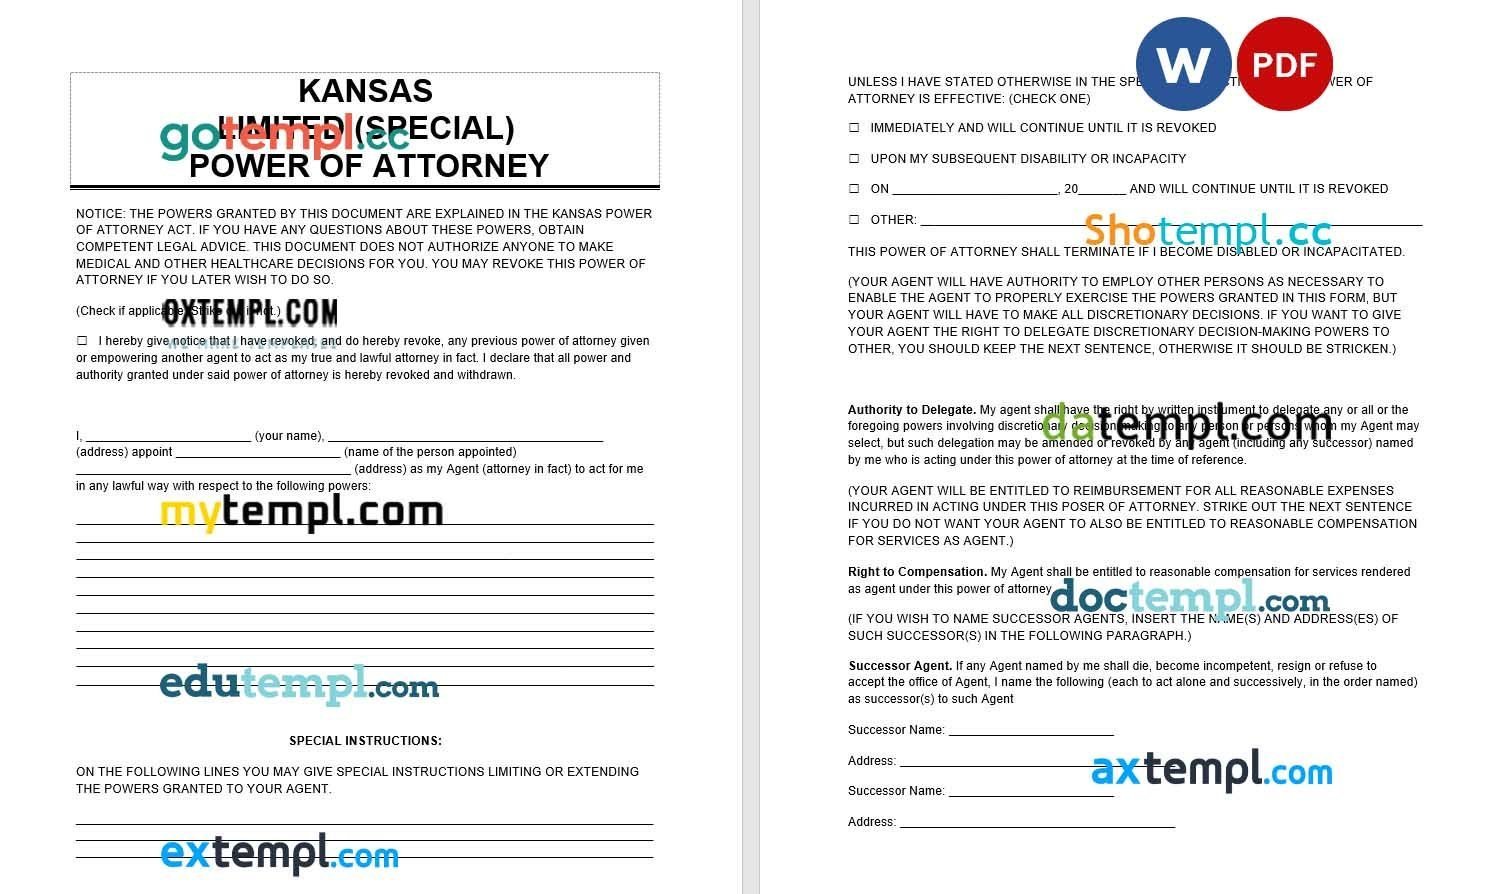 Kansas Limited Power of Attorney example, fully editable